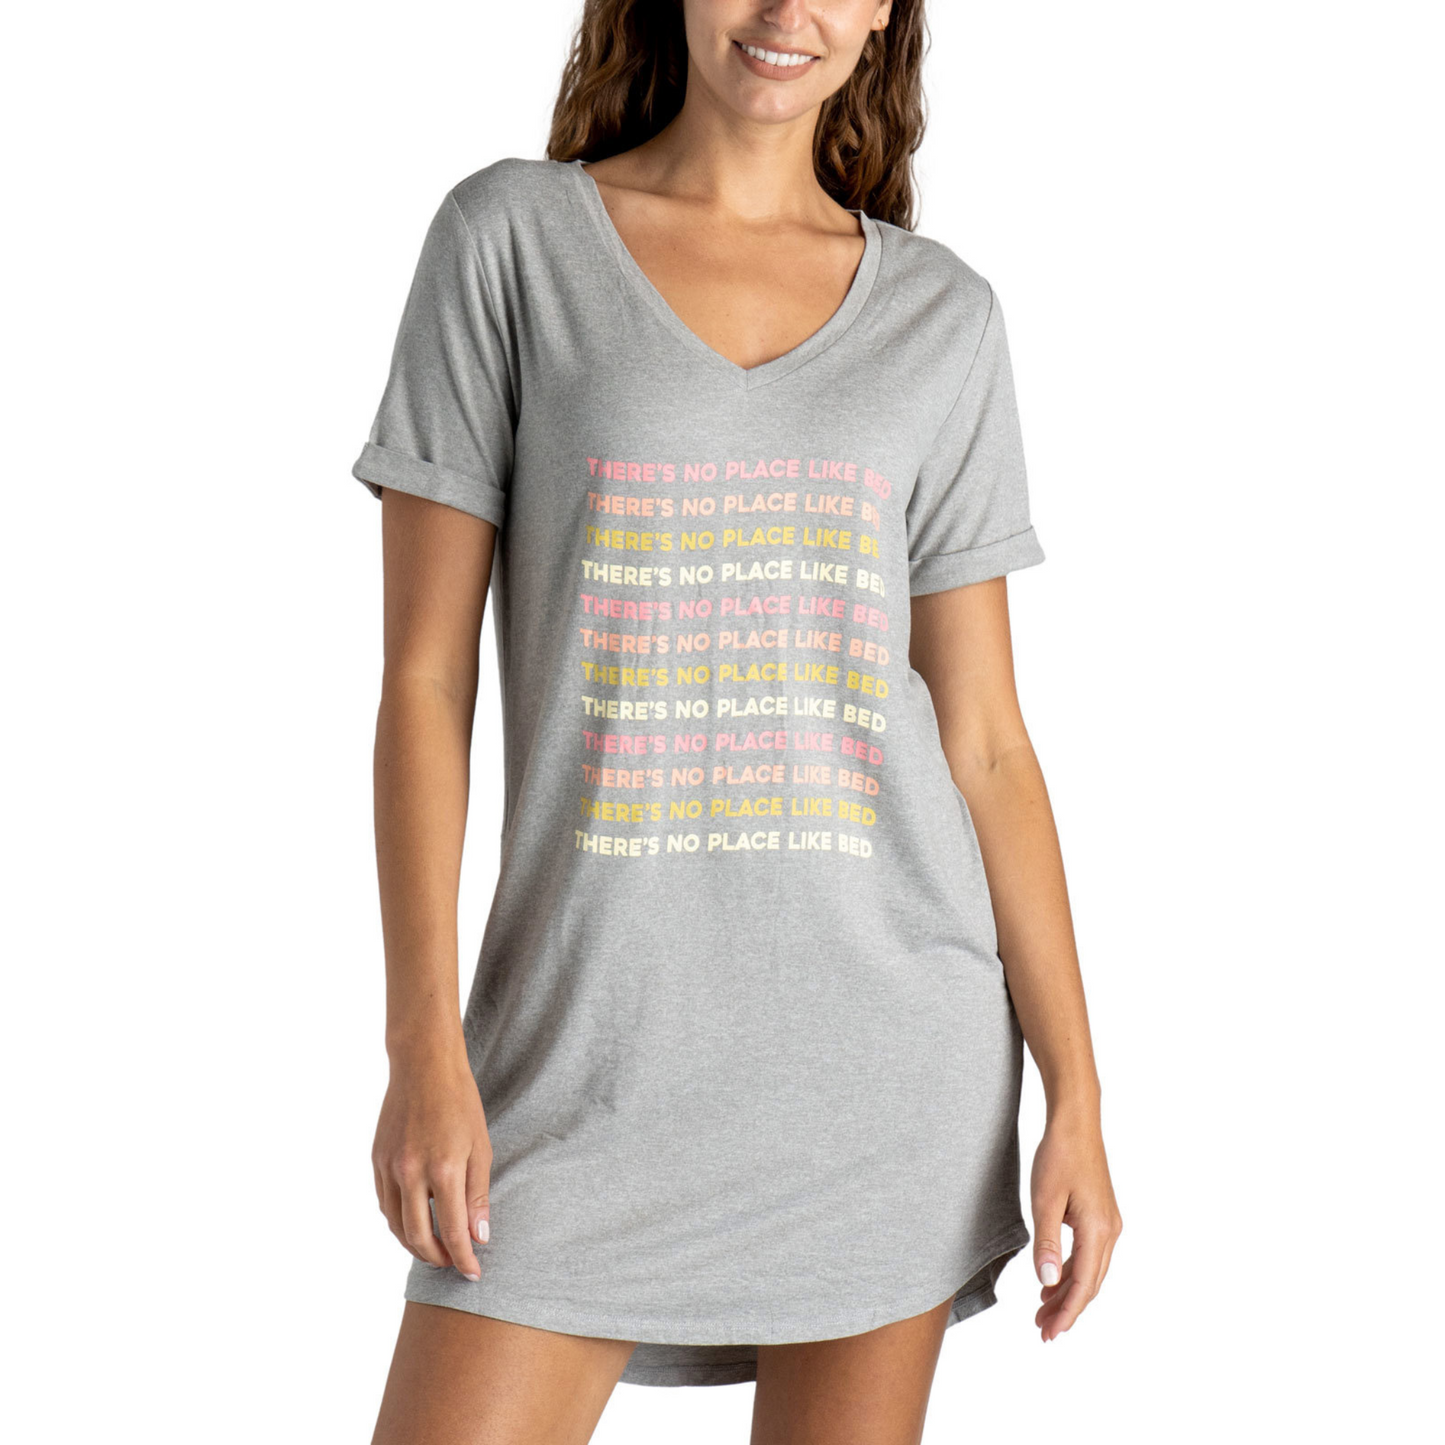 No Place Like Bed graphic sleep shirt by Hello Mello